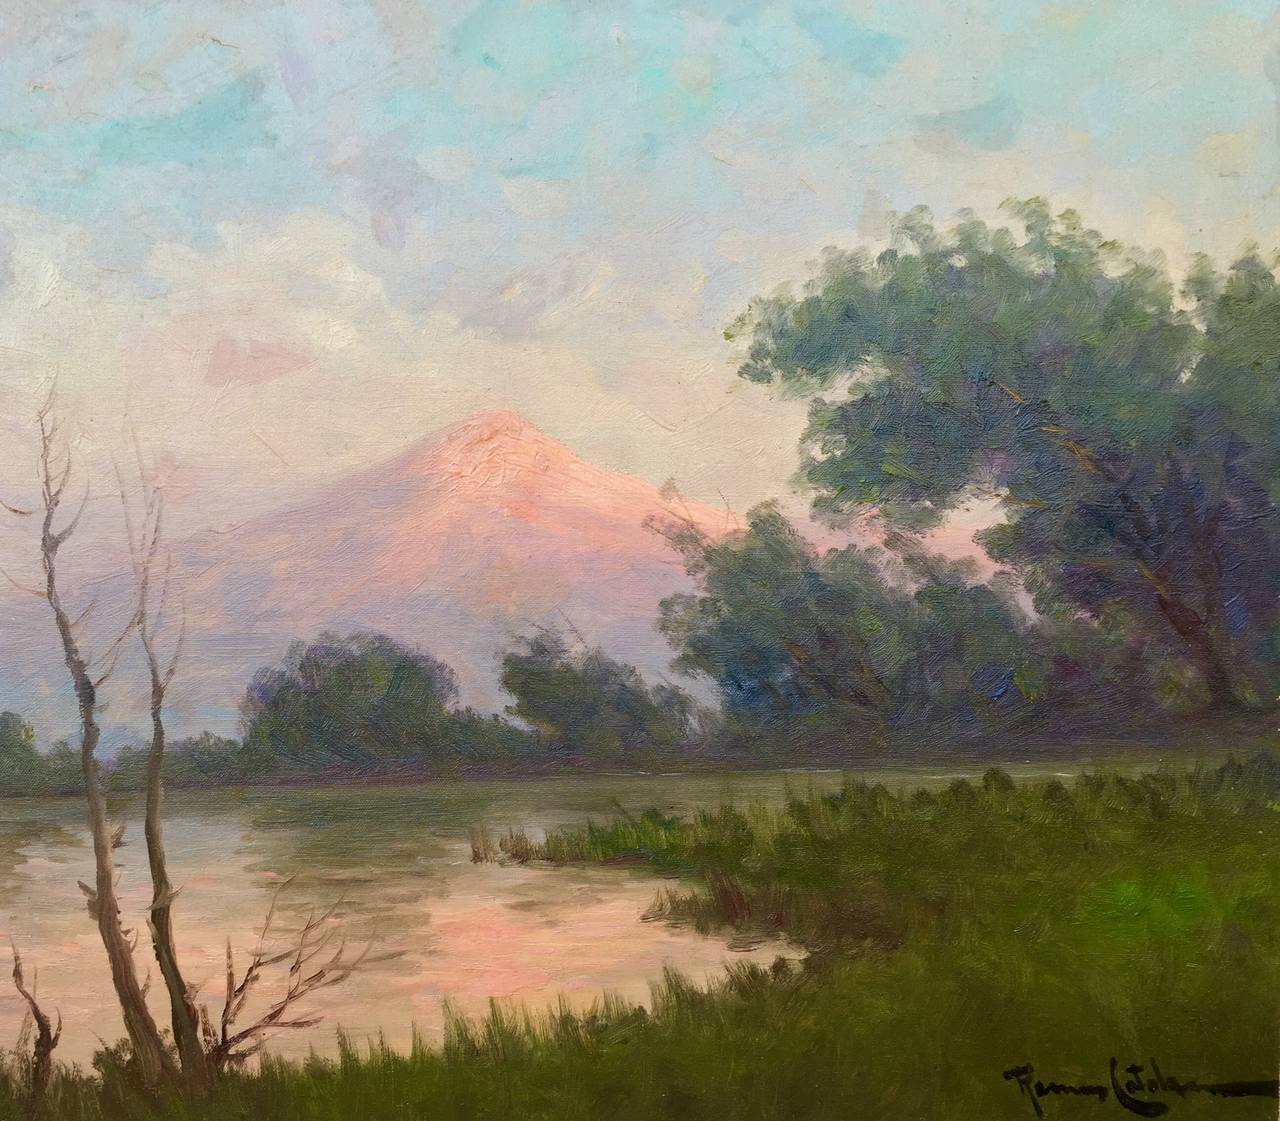 Benito Ramos Catalan - "Twilight in the Andes" at 1stDibs